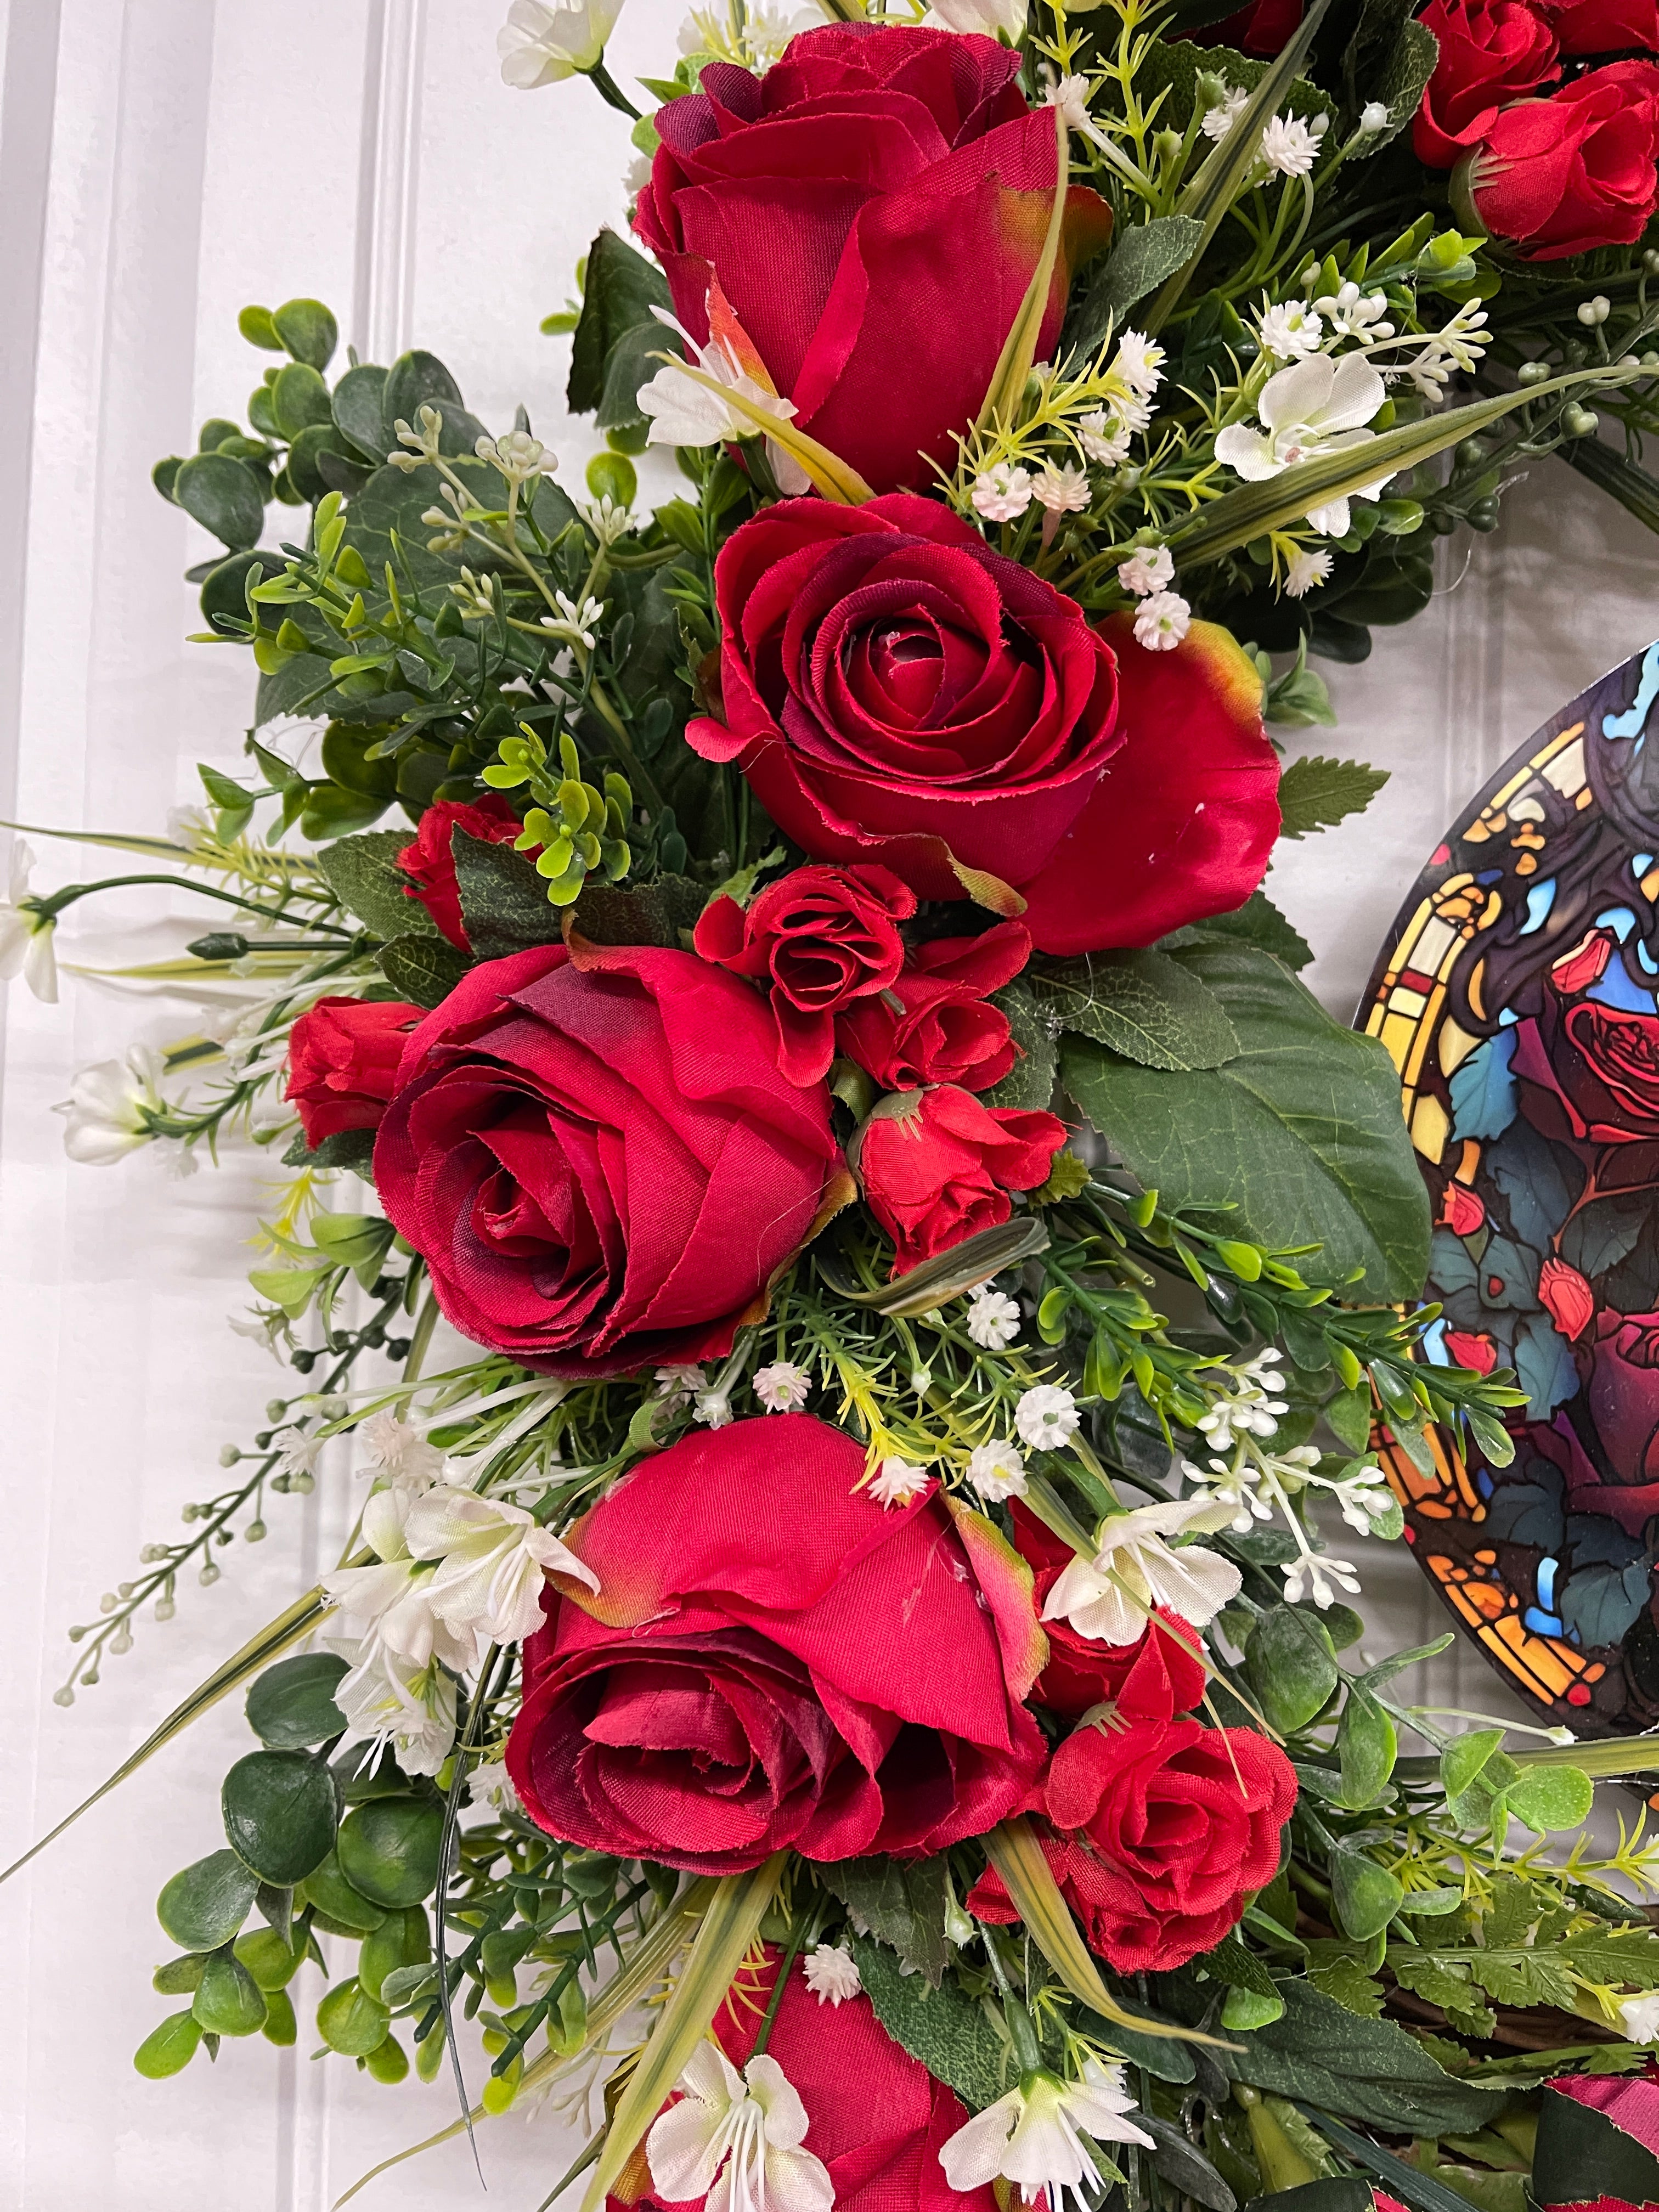 Red Roses with Green Ferns and White Babies Breath 